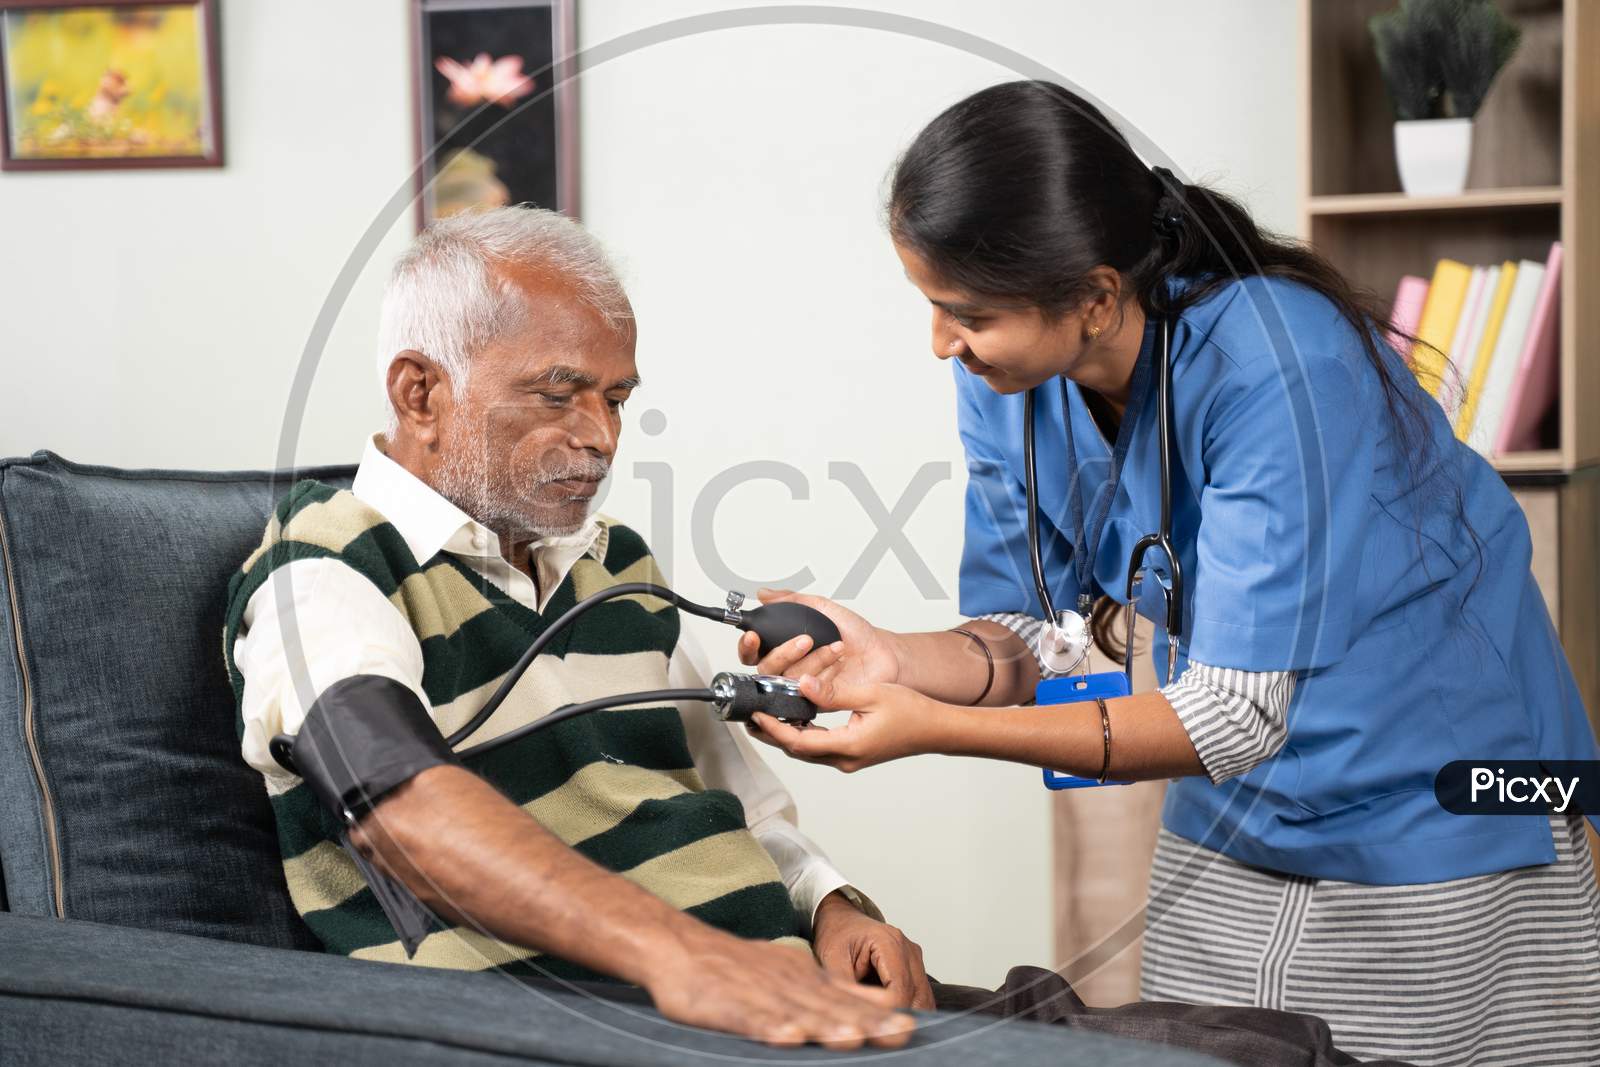 Doctor Or Nurse Checking Blood Pressure Or Bp Of Patient At Home - Concept Of Elderly People Routine Home Health Care Or Service.